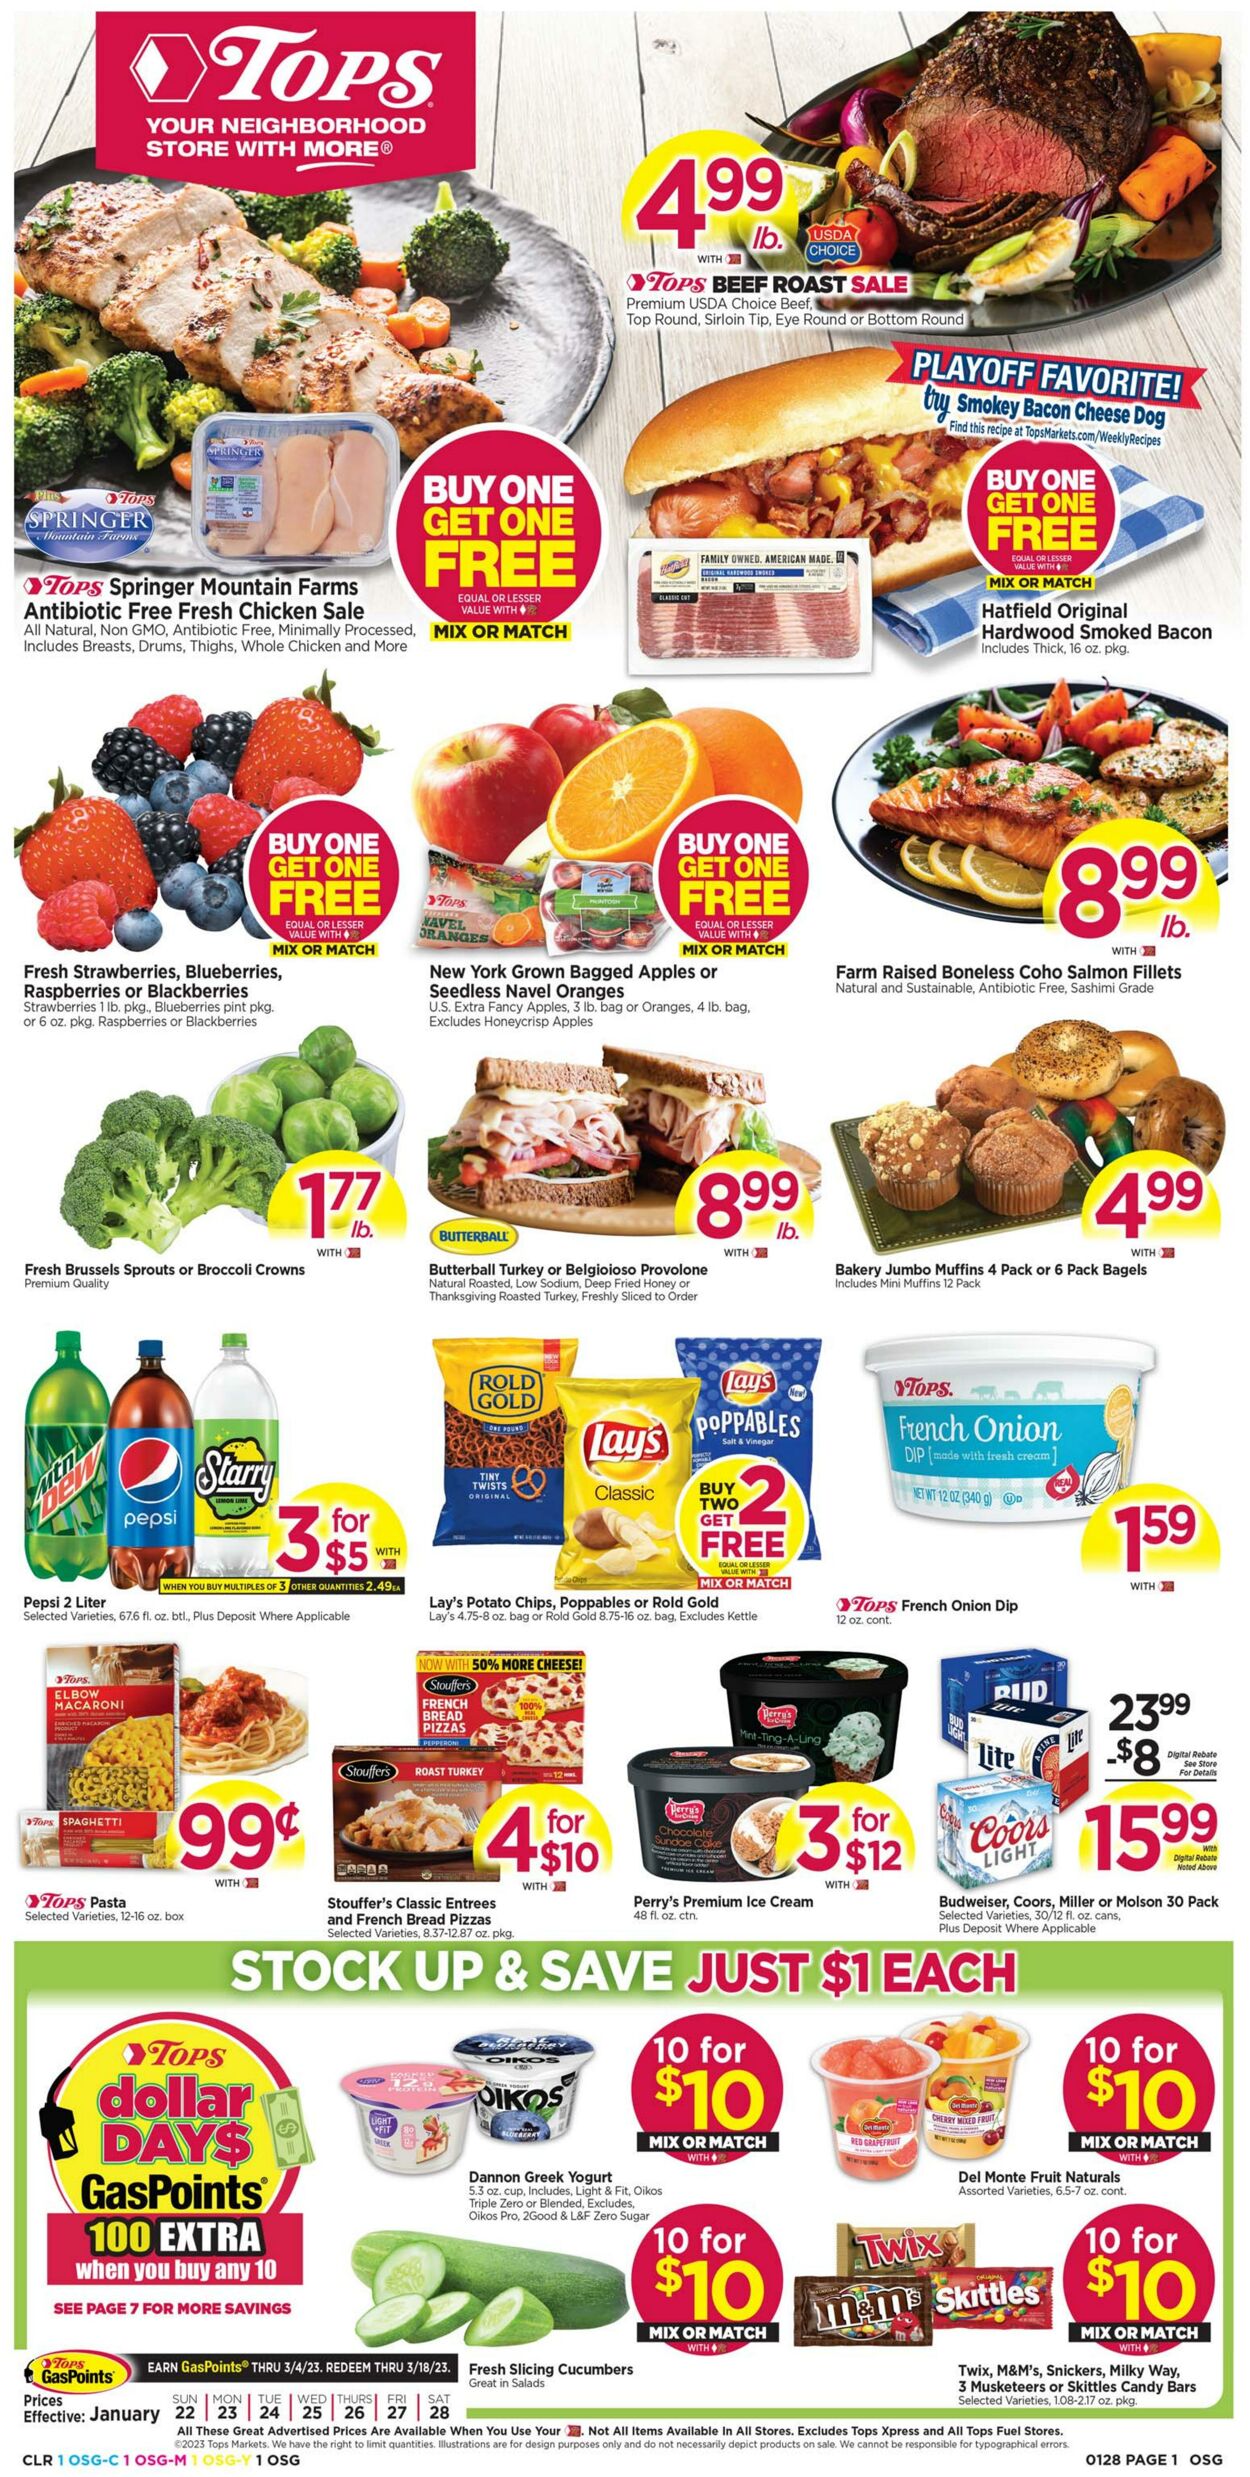 Tops Friendly Markets Promotional weekly ads